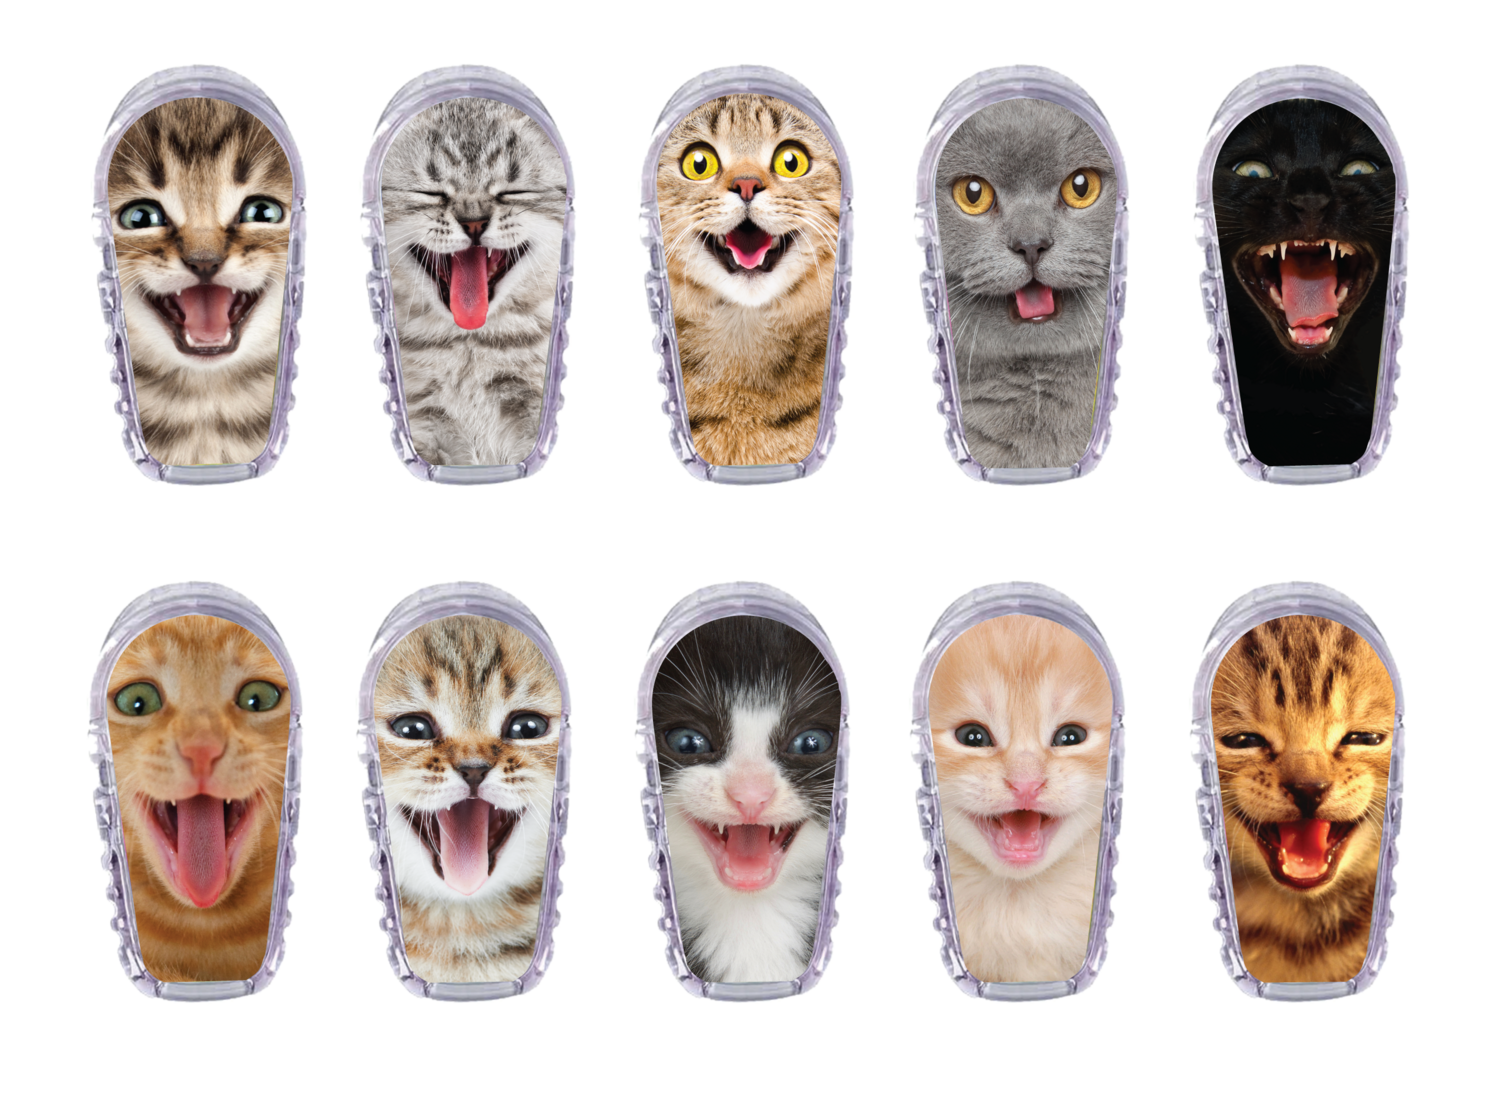 Dexcom Transmitter Stickers for Dexcom Decals Cats - 10 Count Variety Pack